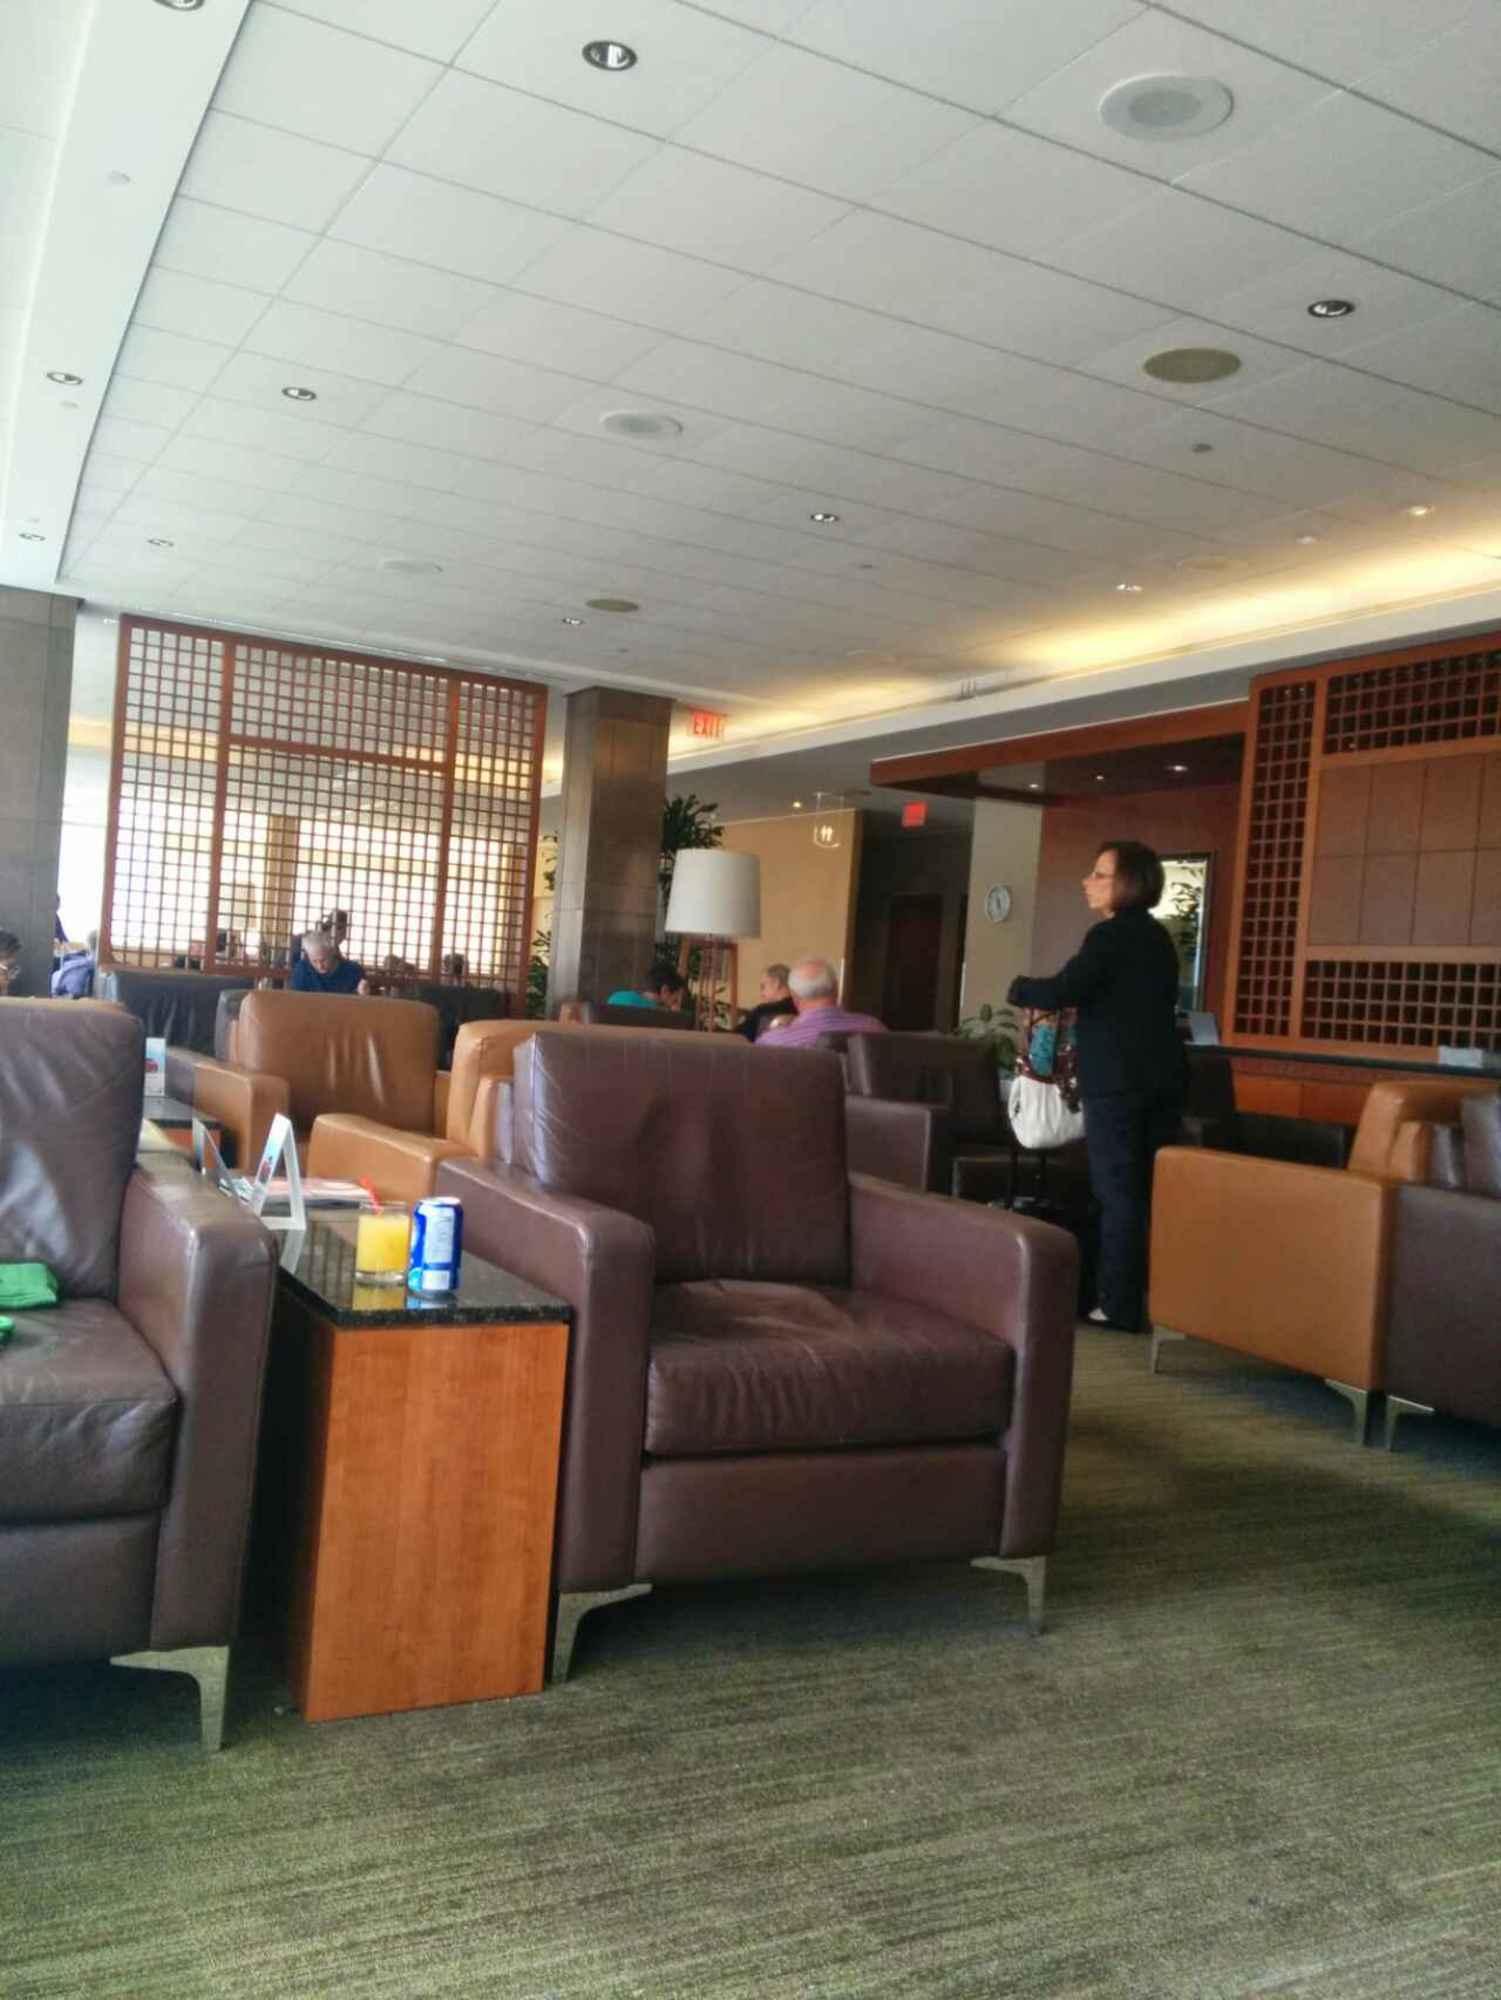 Air Canada Maple Leaf Lounge image 2 of 9